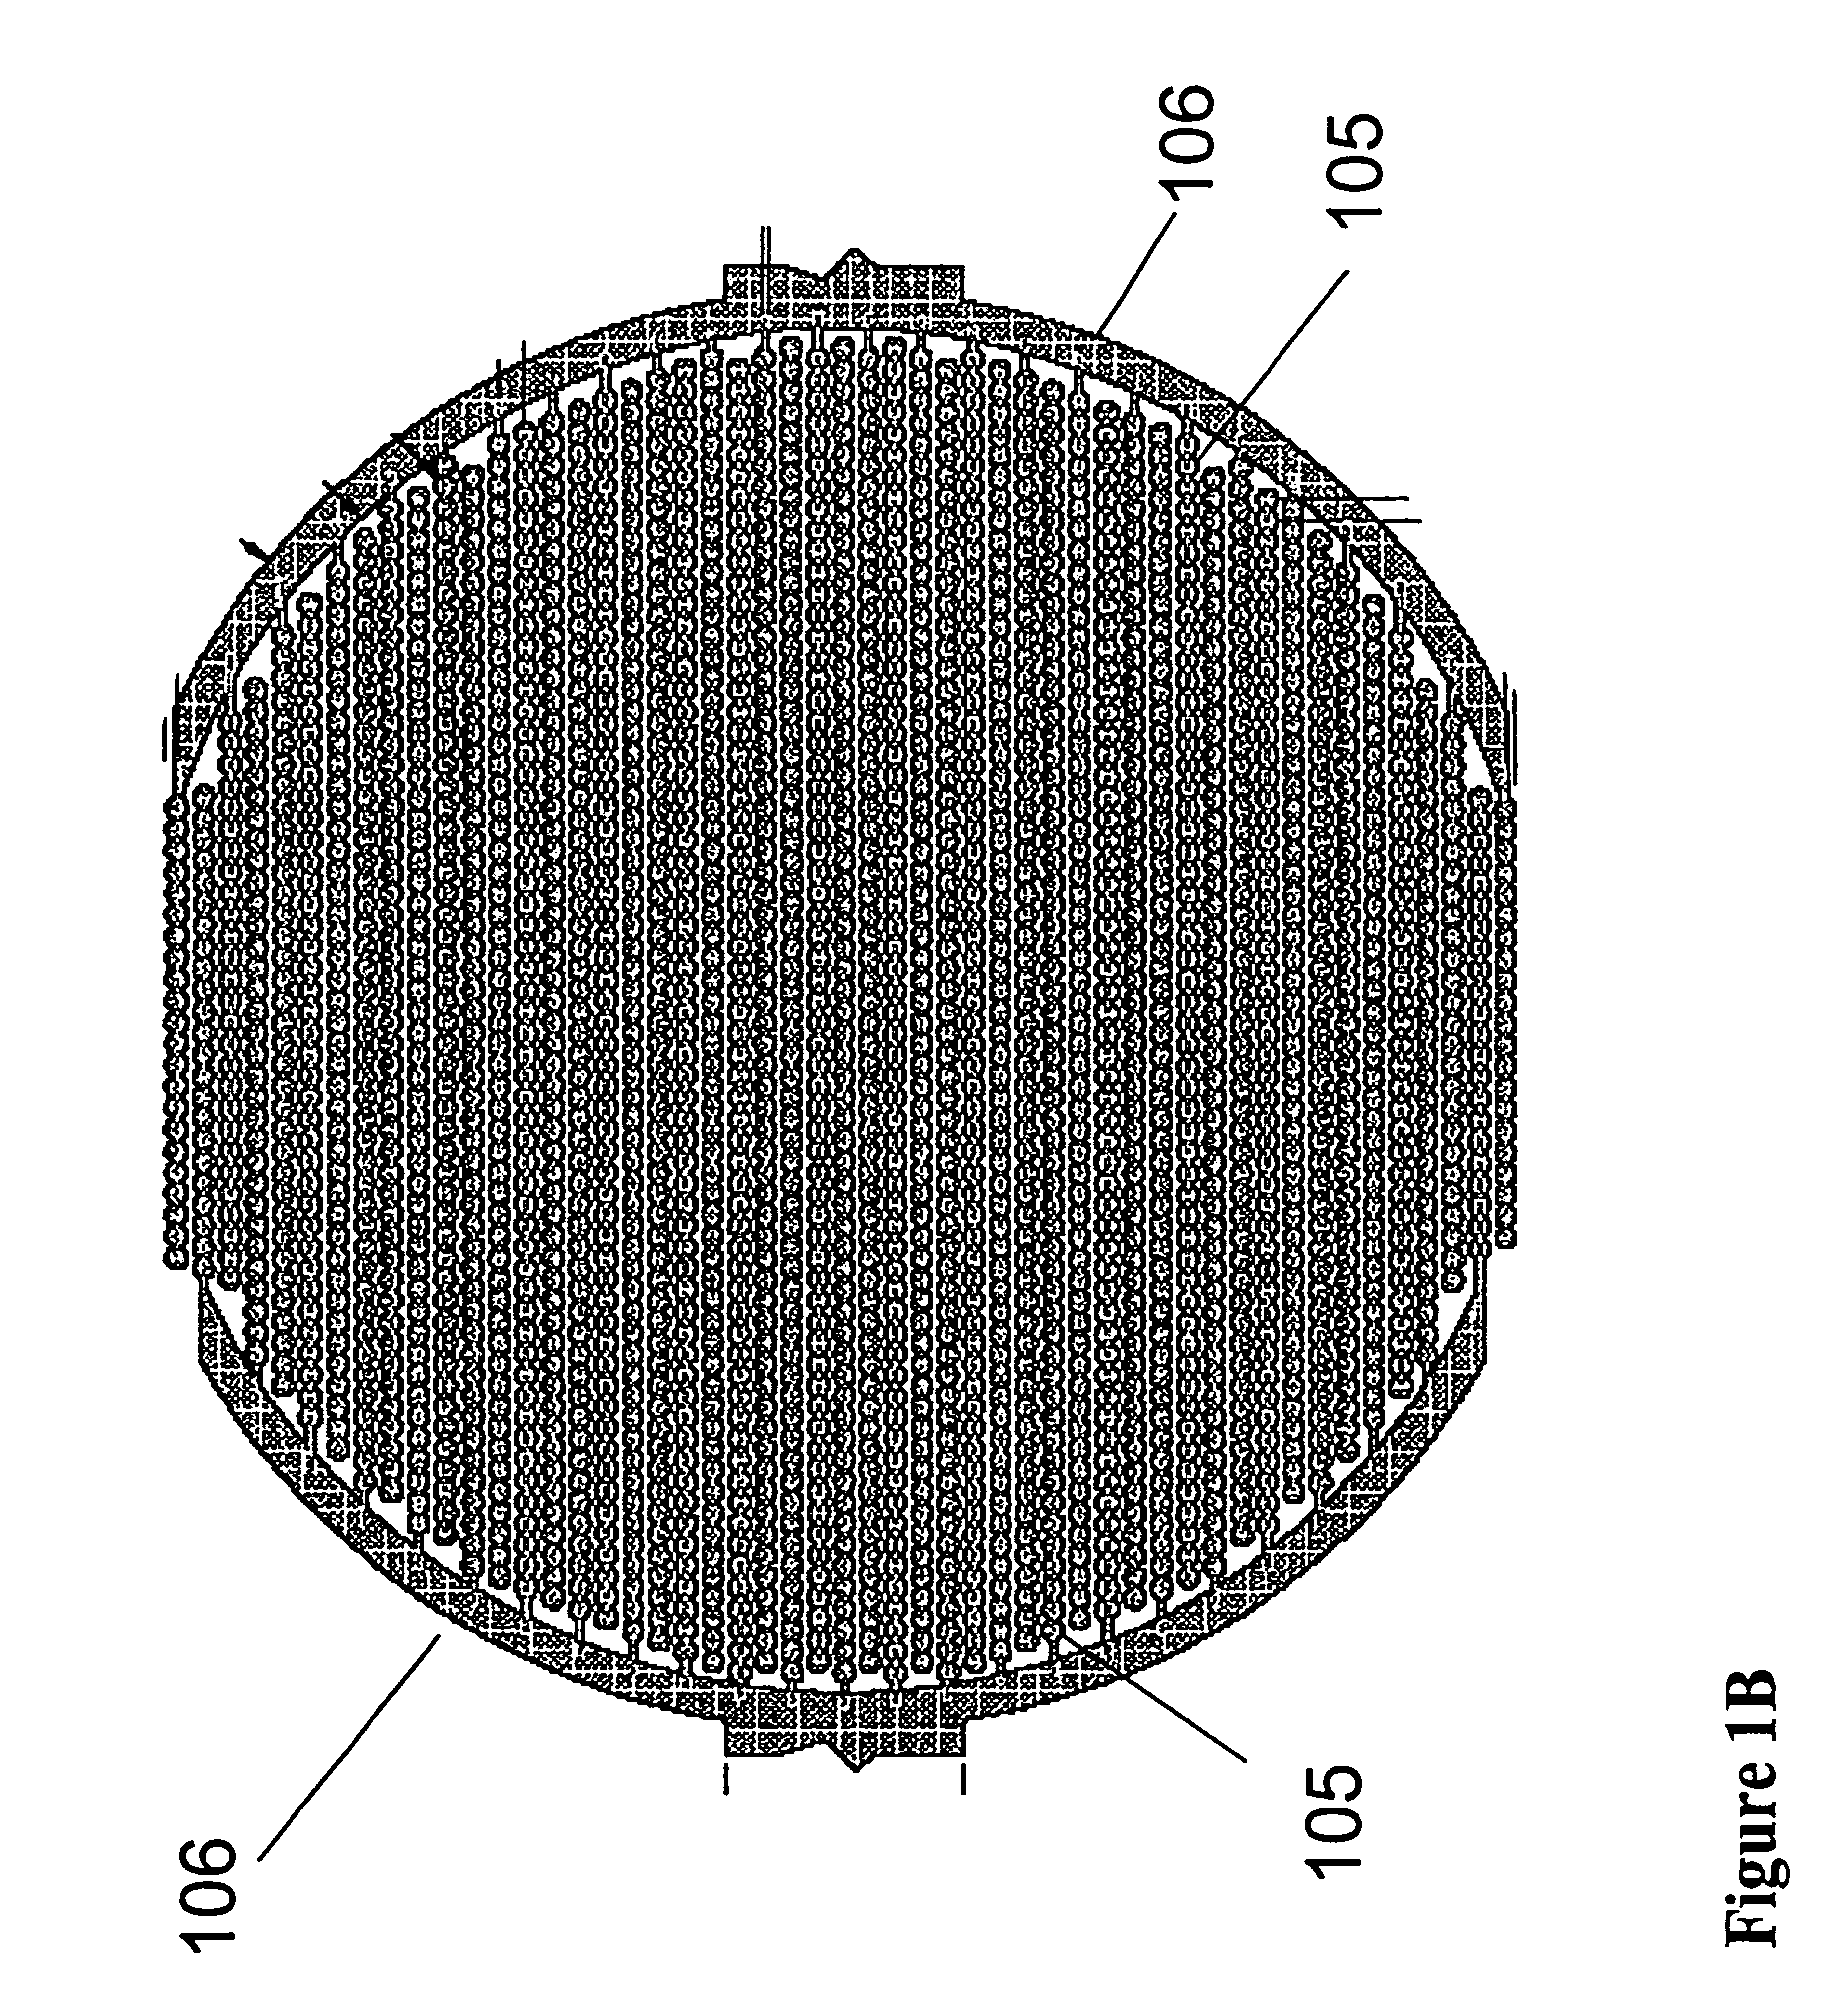 Method for assaying for natural killer, cytotoxic T-lymphocyte and neutrophil-mediated killing of target cells using real-time microelectronic cell sensing technology